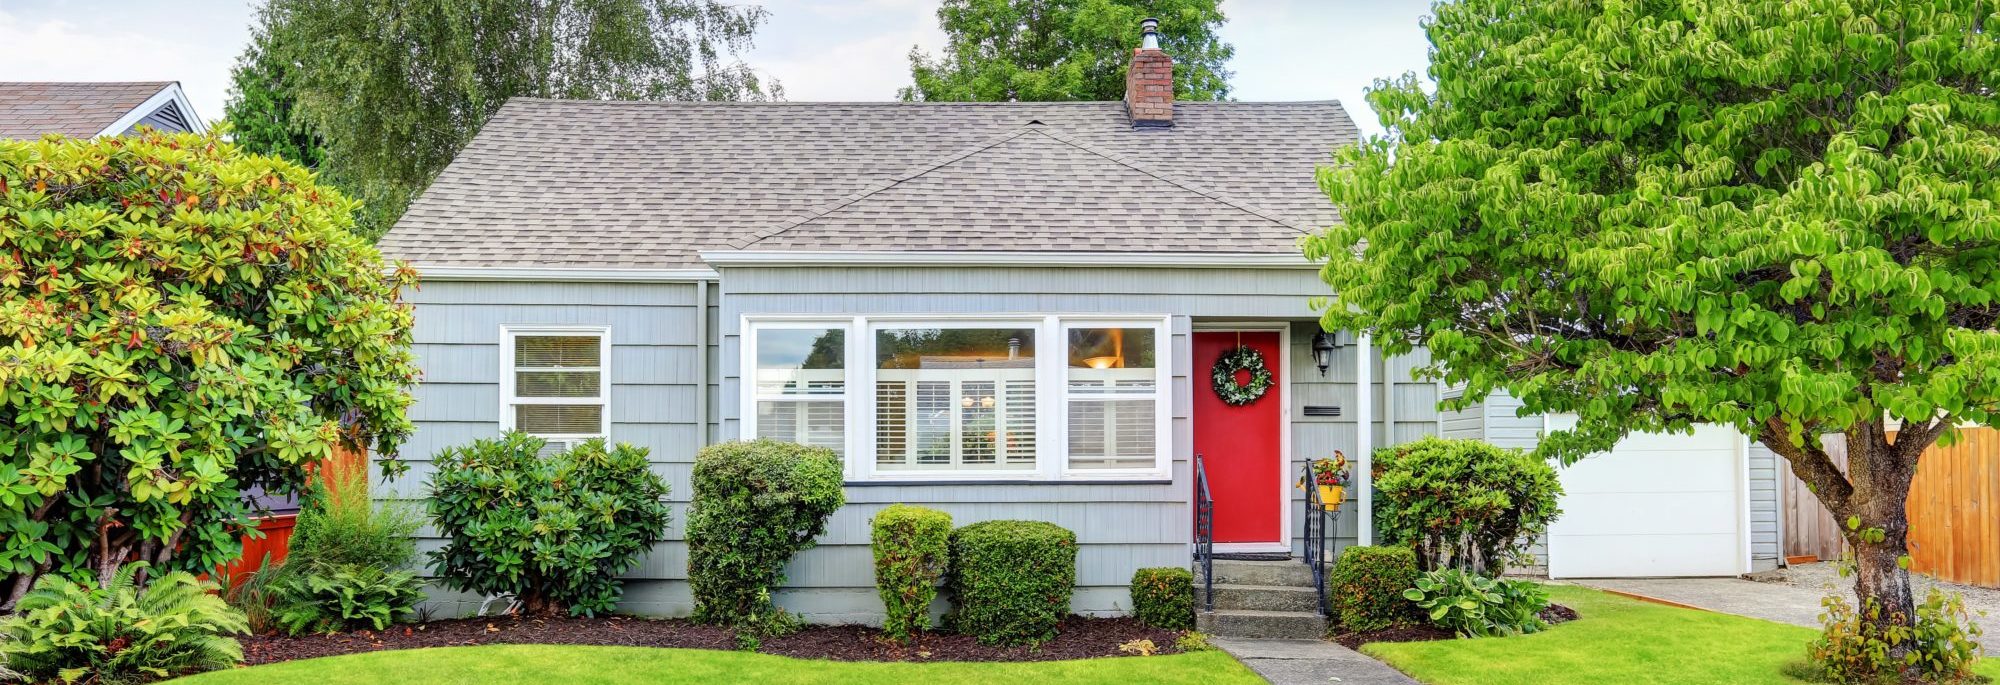 Exterior of small American house with blue paint and red entrance door. Northwest, USA